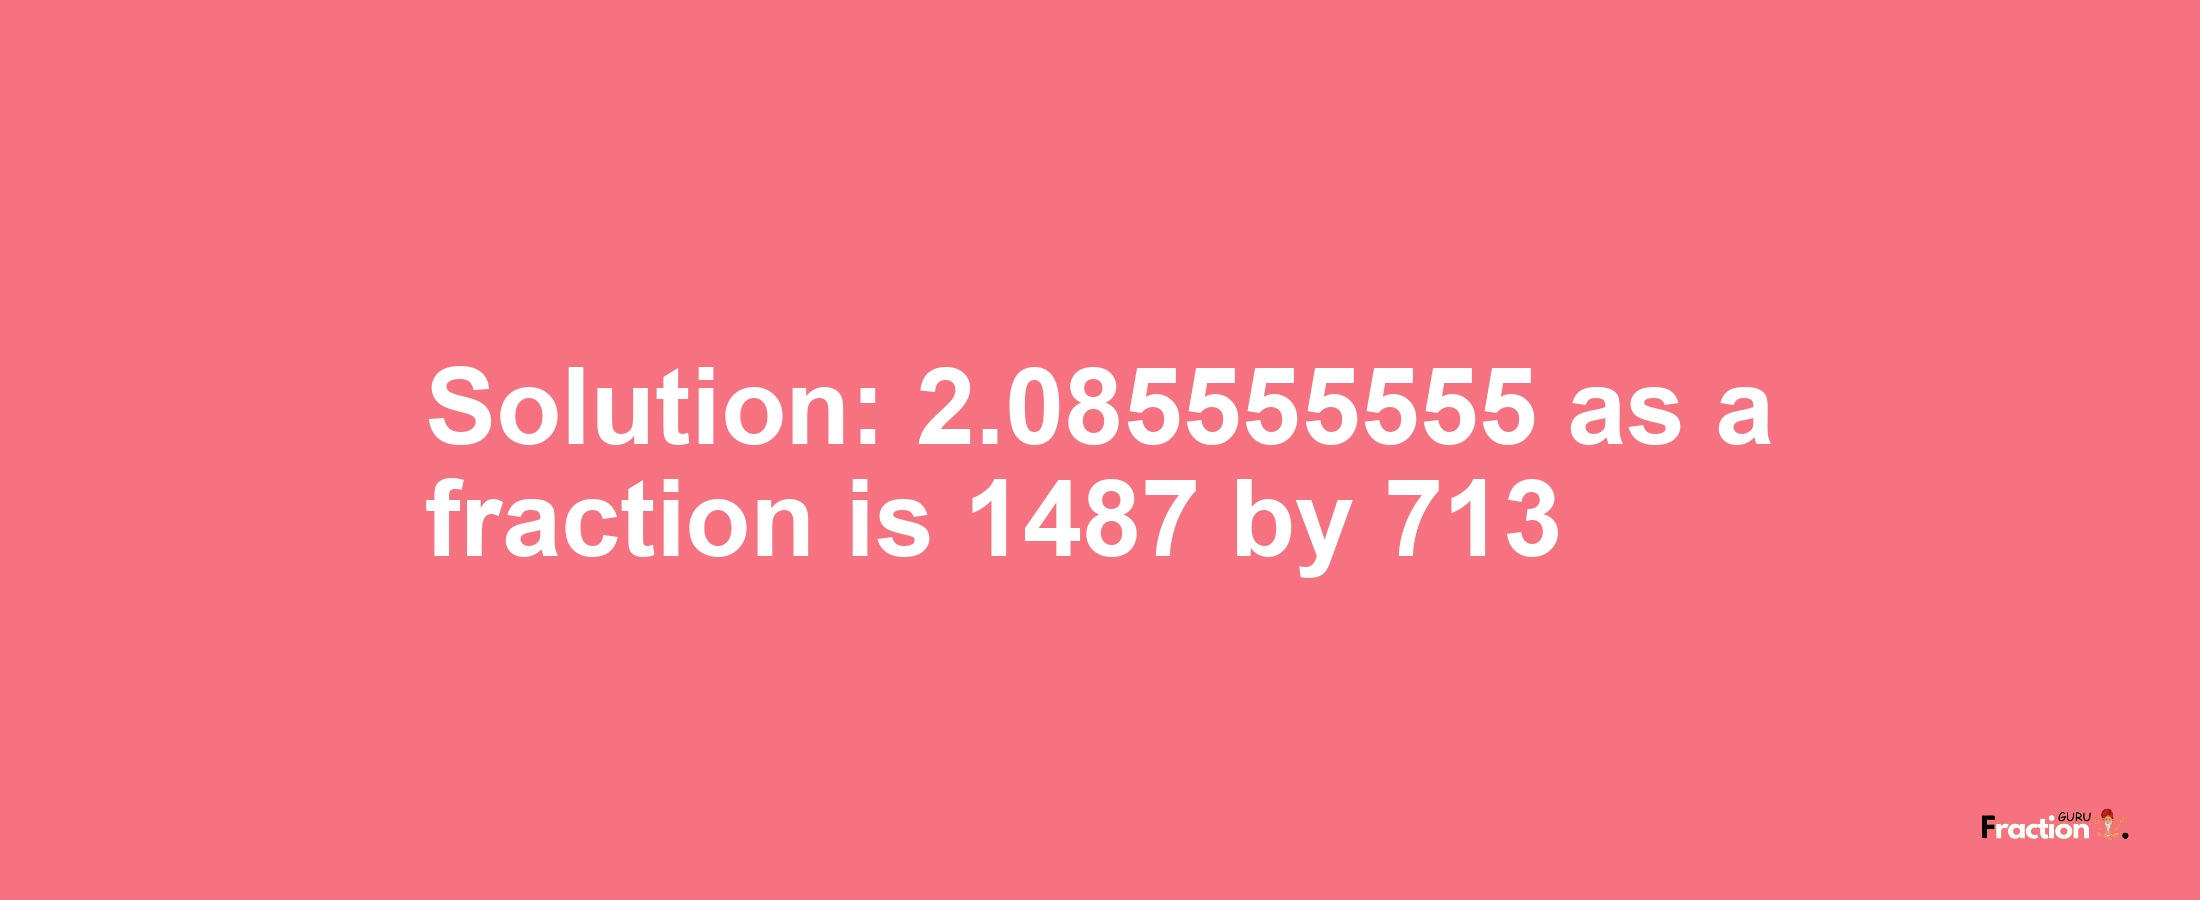 Solution:2.085555555 as a fraction is 1487/713